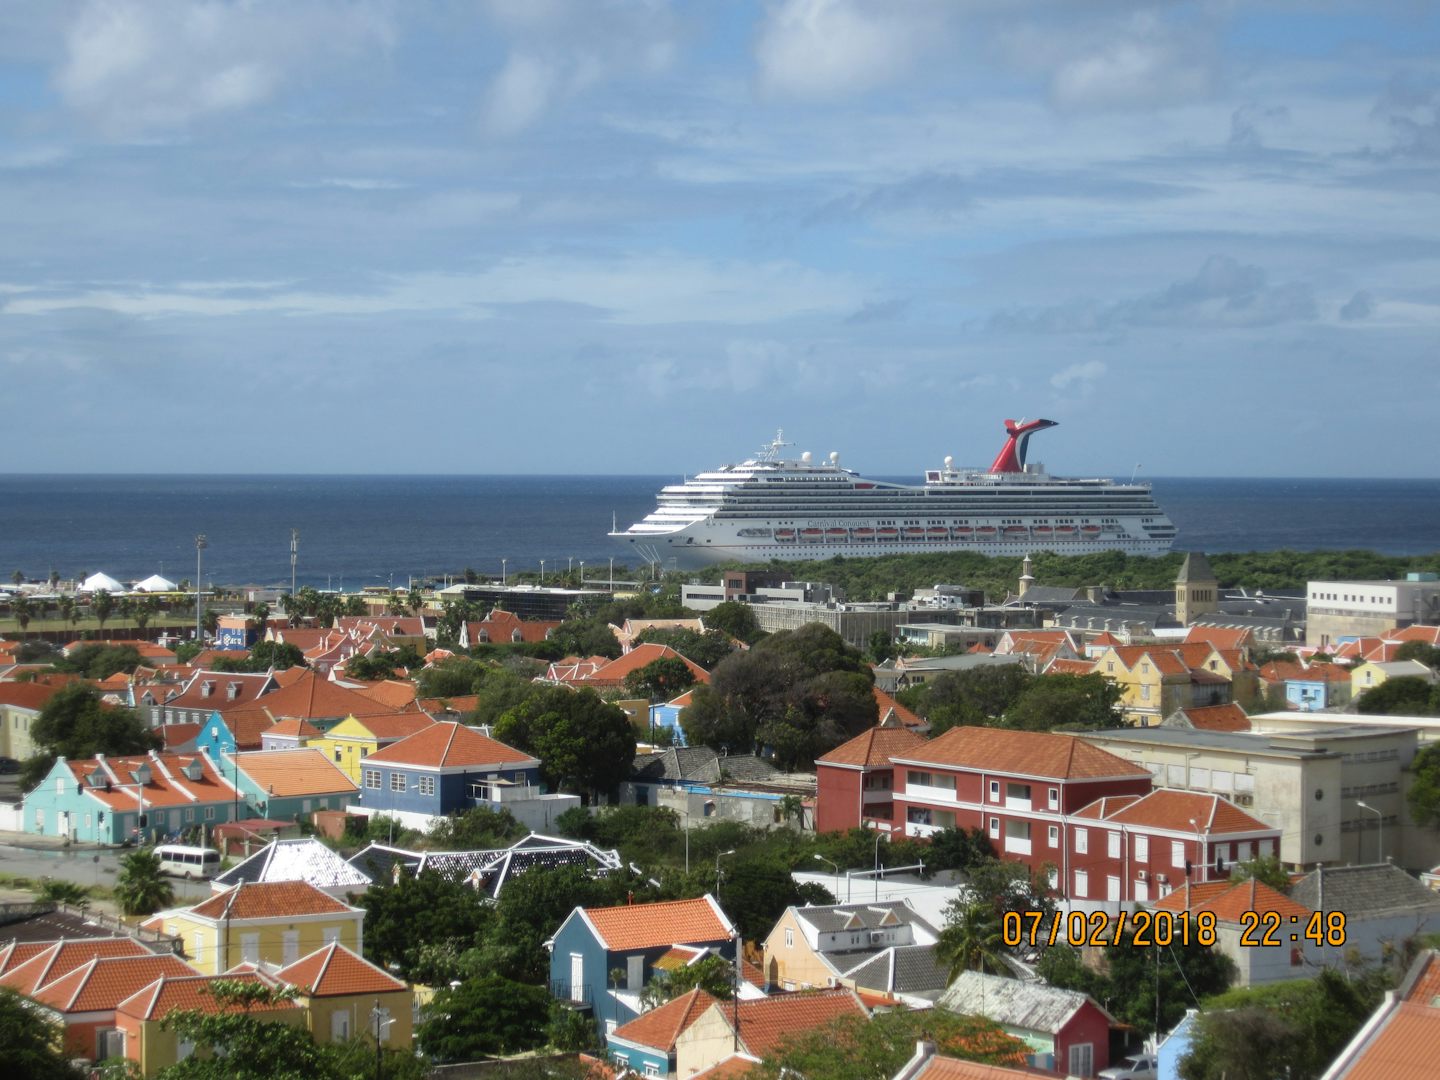 Picturesque Curacao w/ Conquest